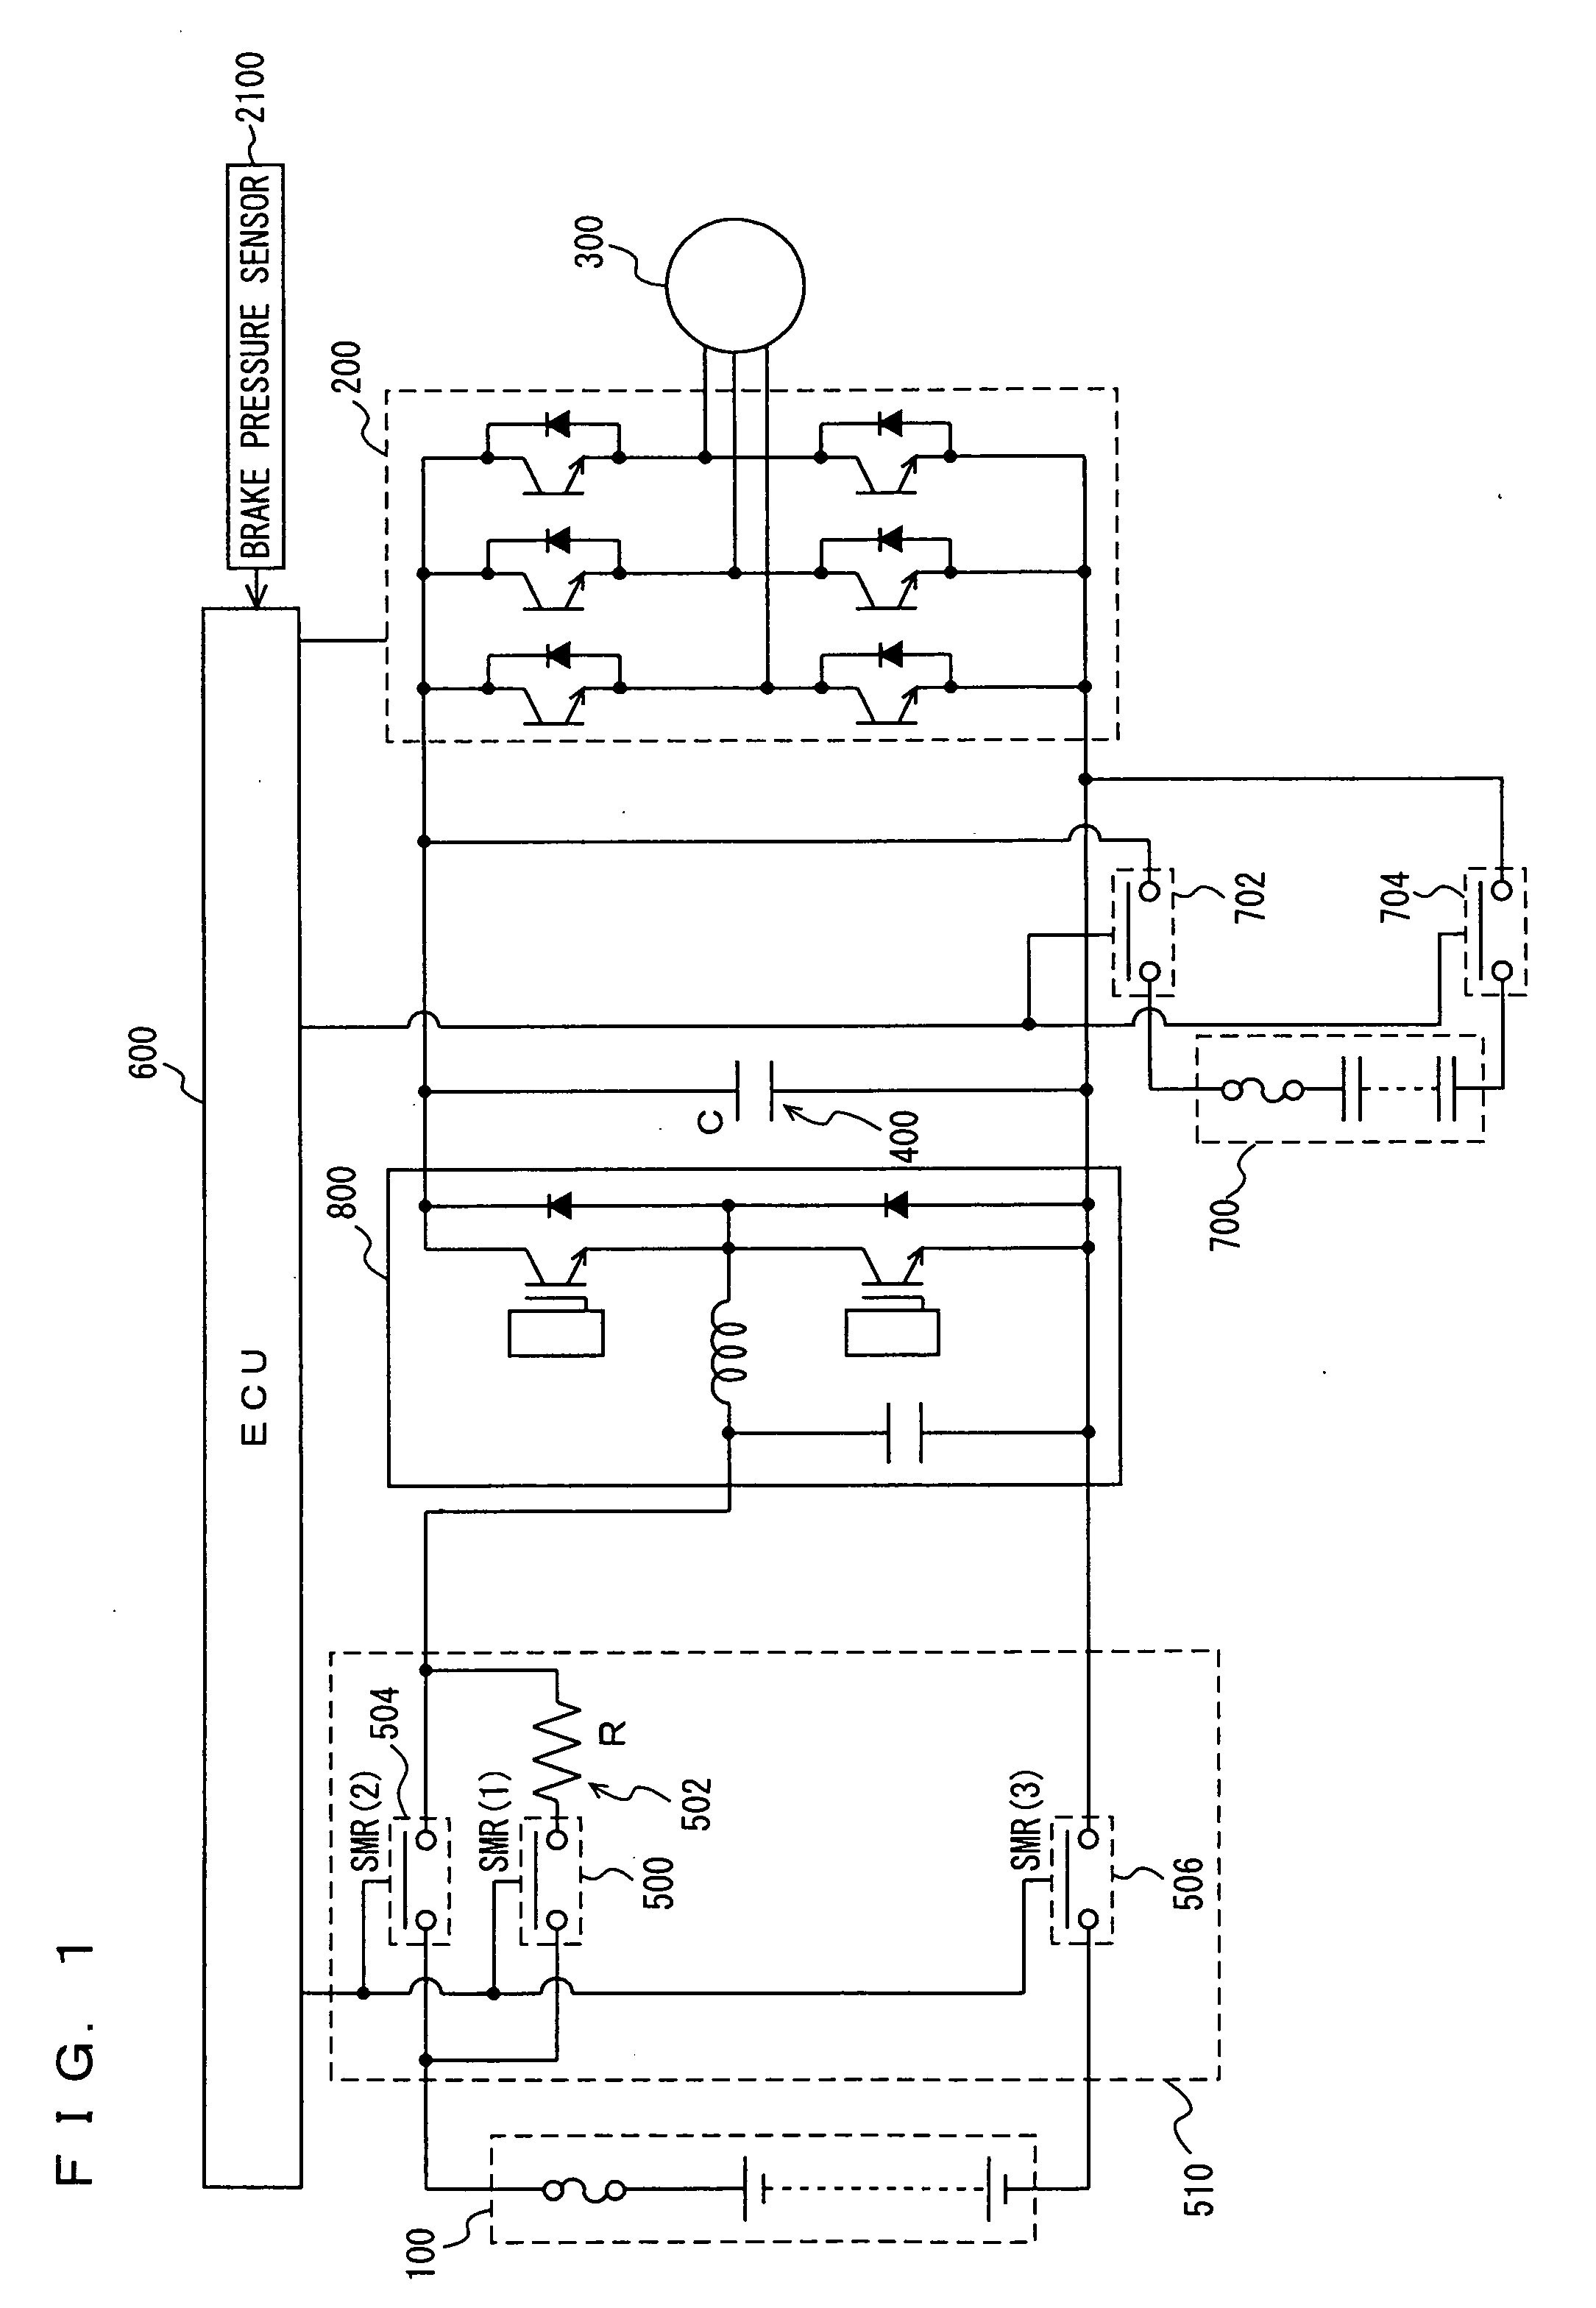 Vehicle Power Controller